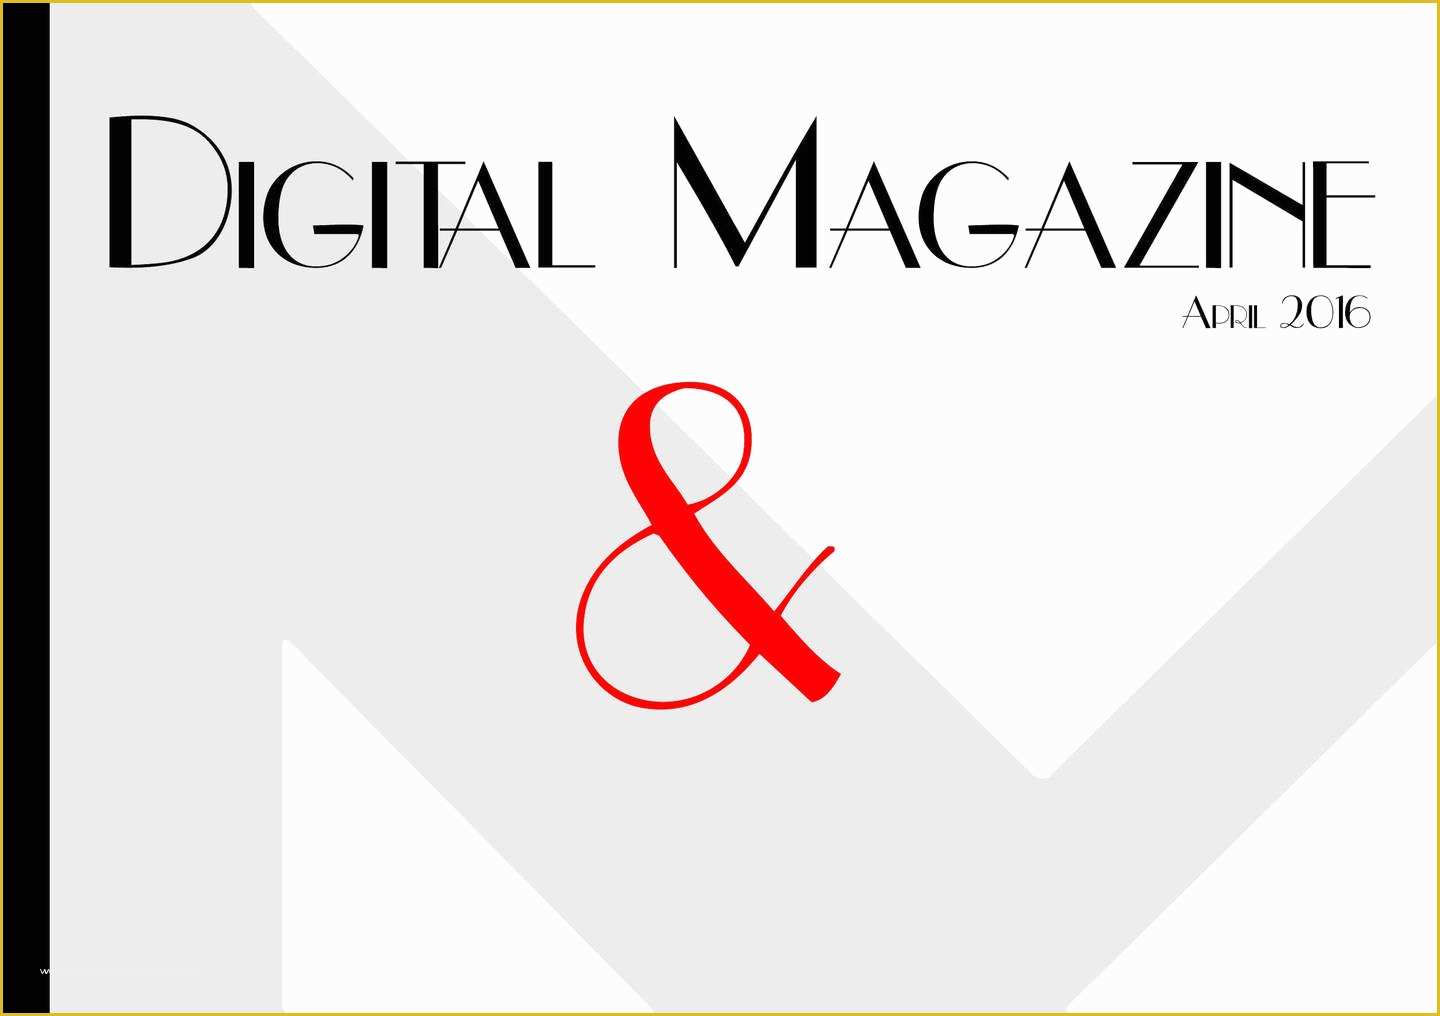 Free Magazine Layout Templates for Word Of Free Magazine Templates Magazine Cover Designs